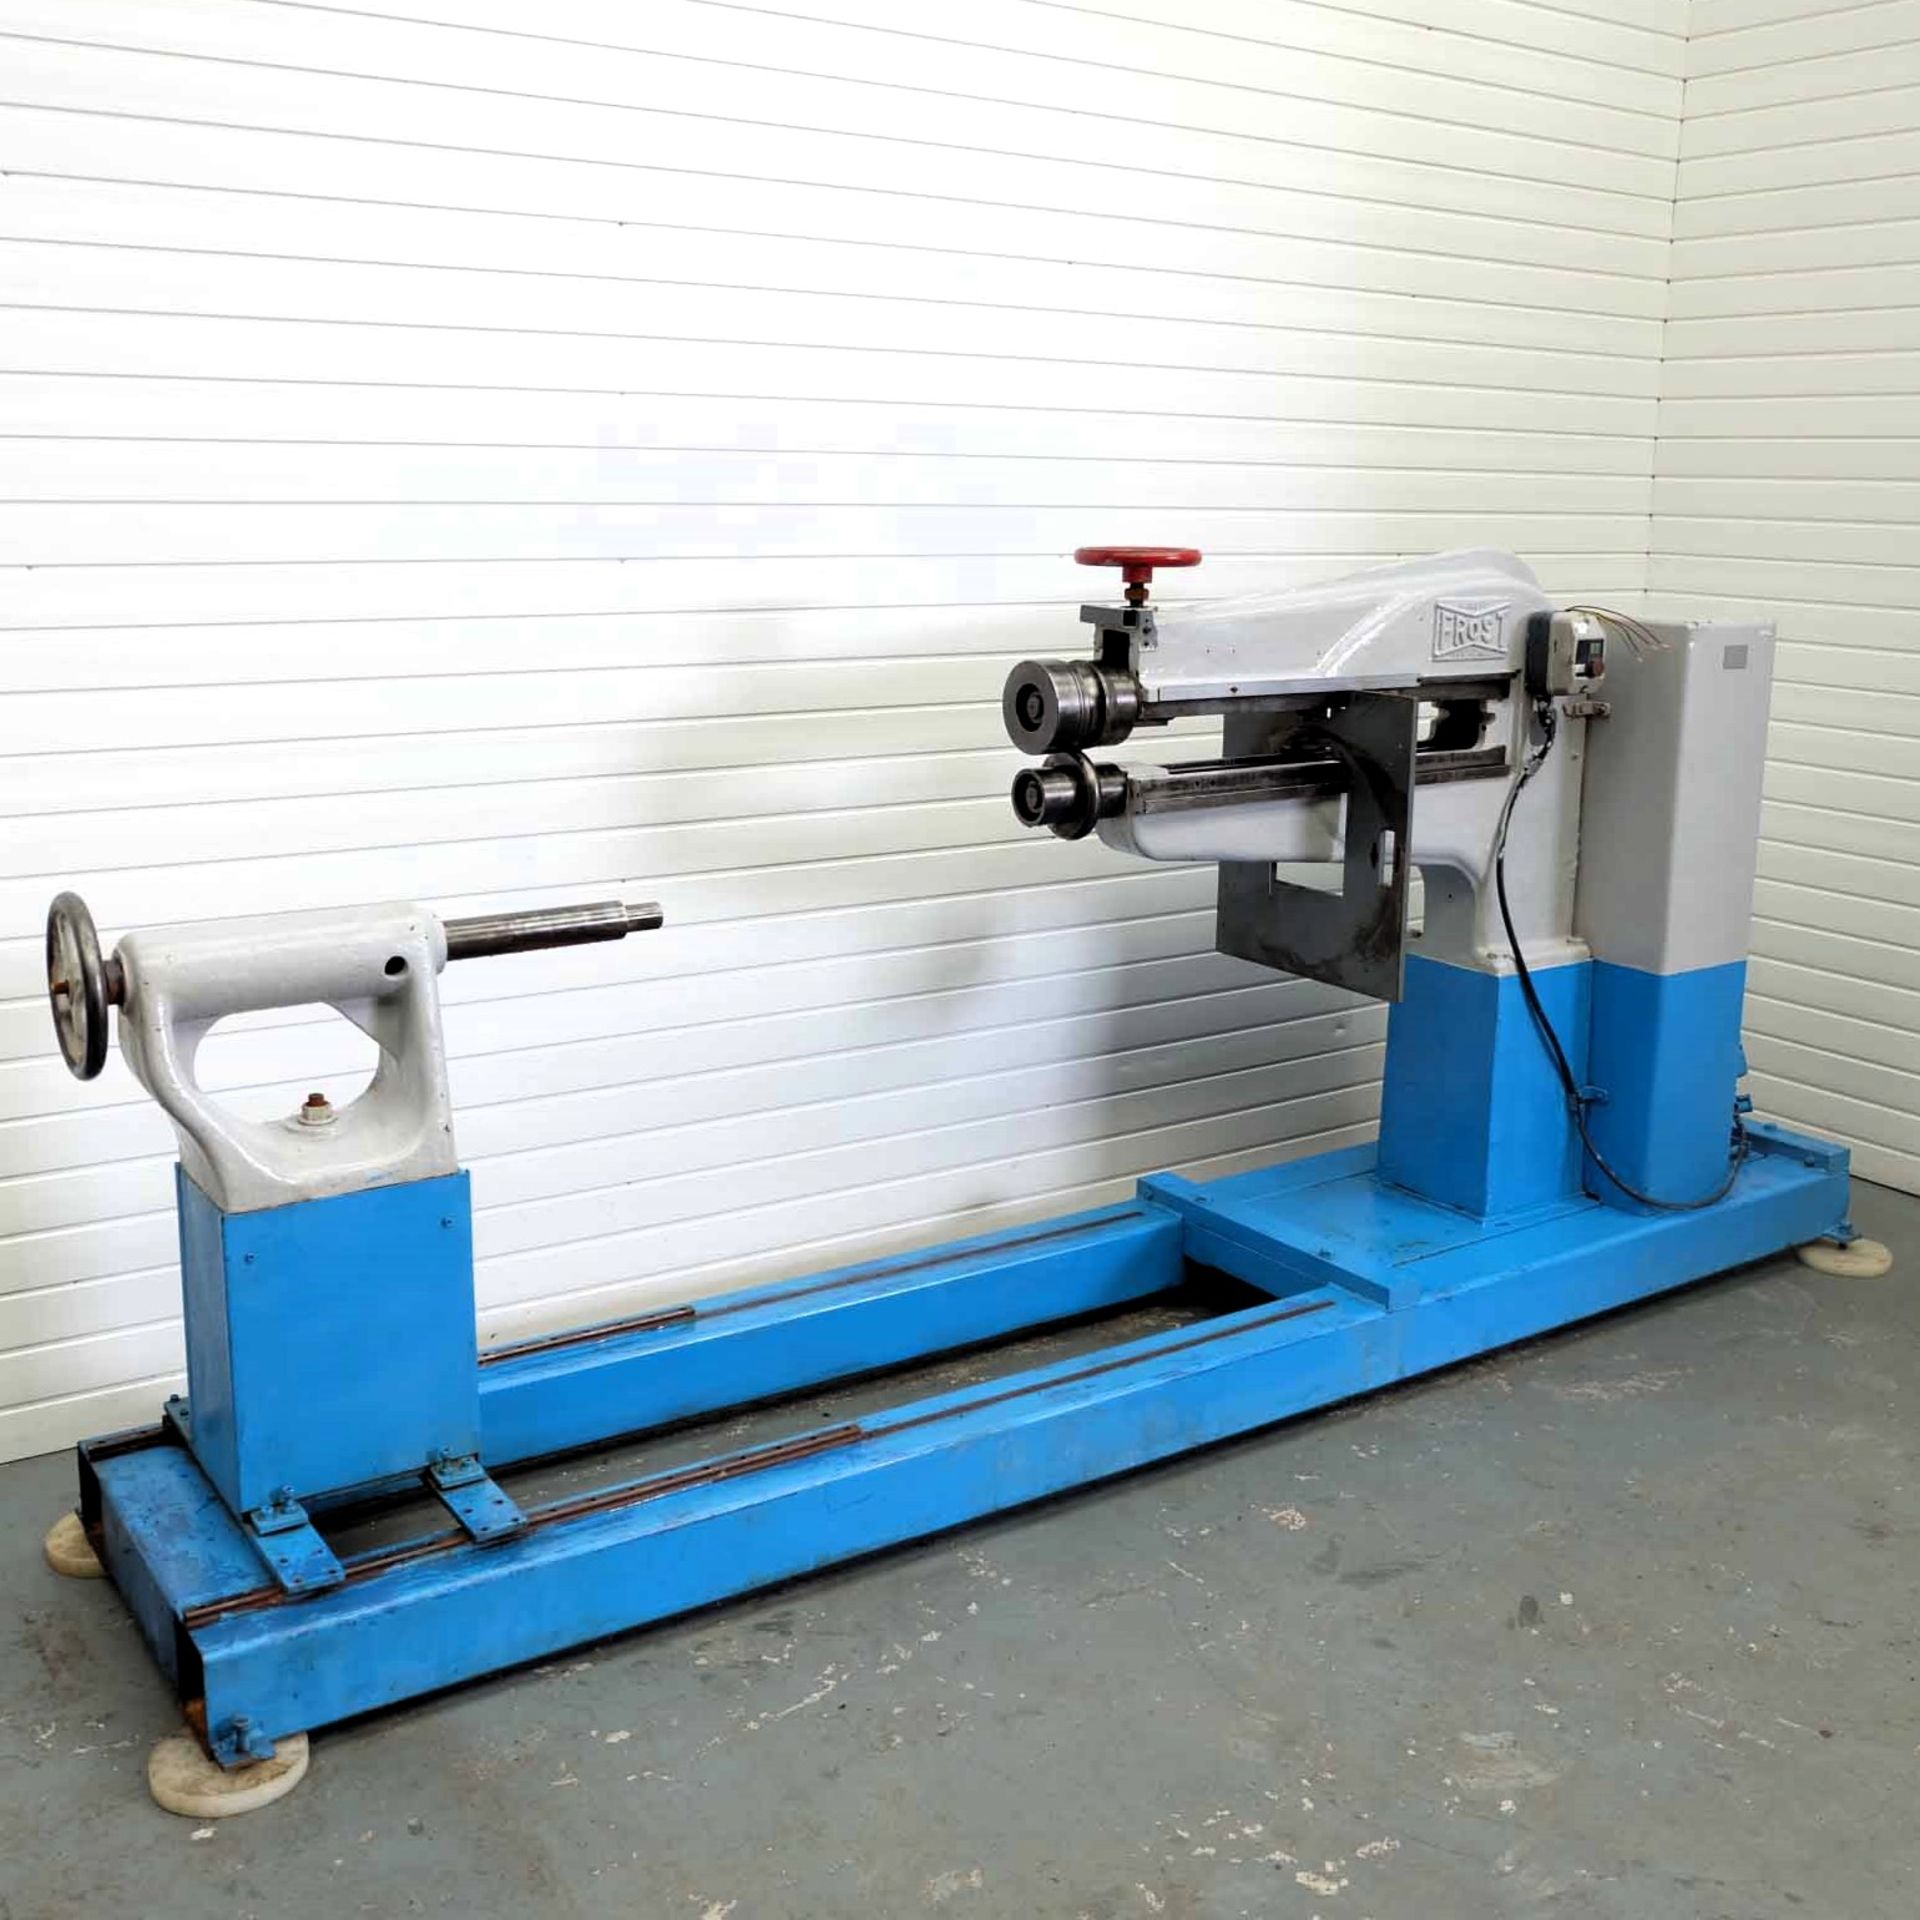 Frost Swaging Machine. Throat Depth 36" Approx. With Tailstock. Motor 3 Phase, 1 HP. - Bild 2 aus 10